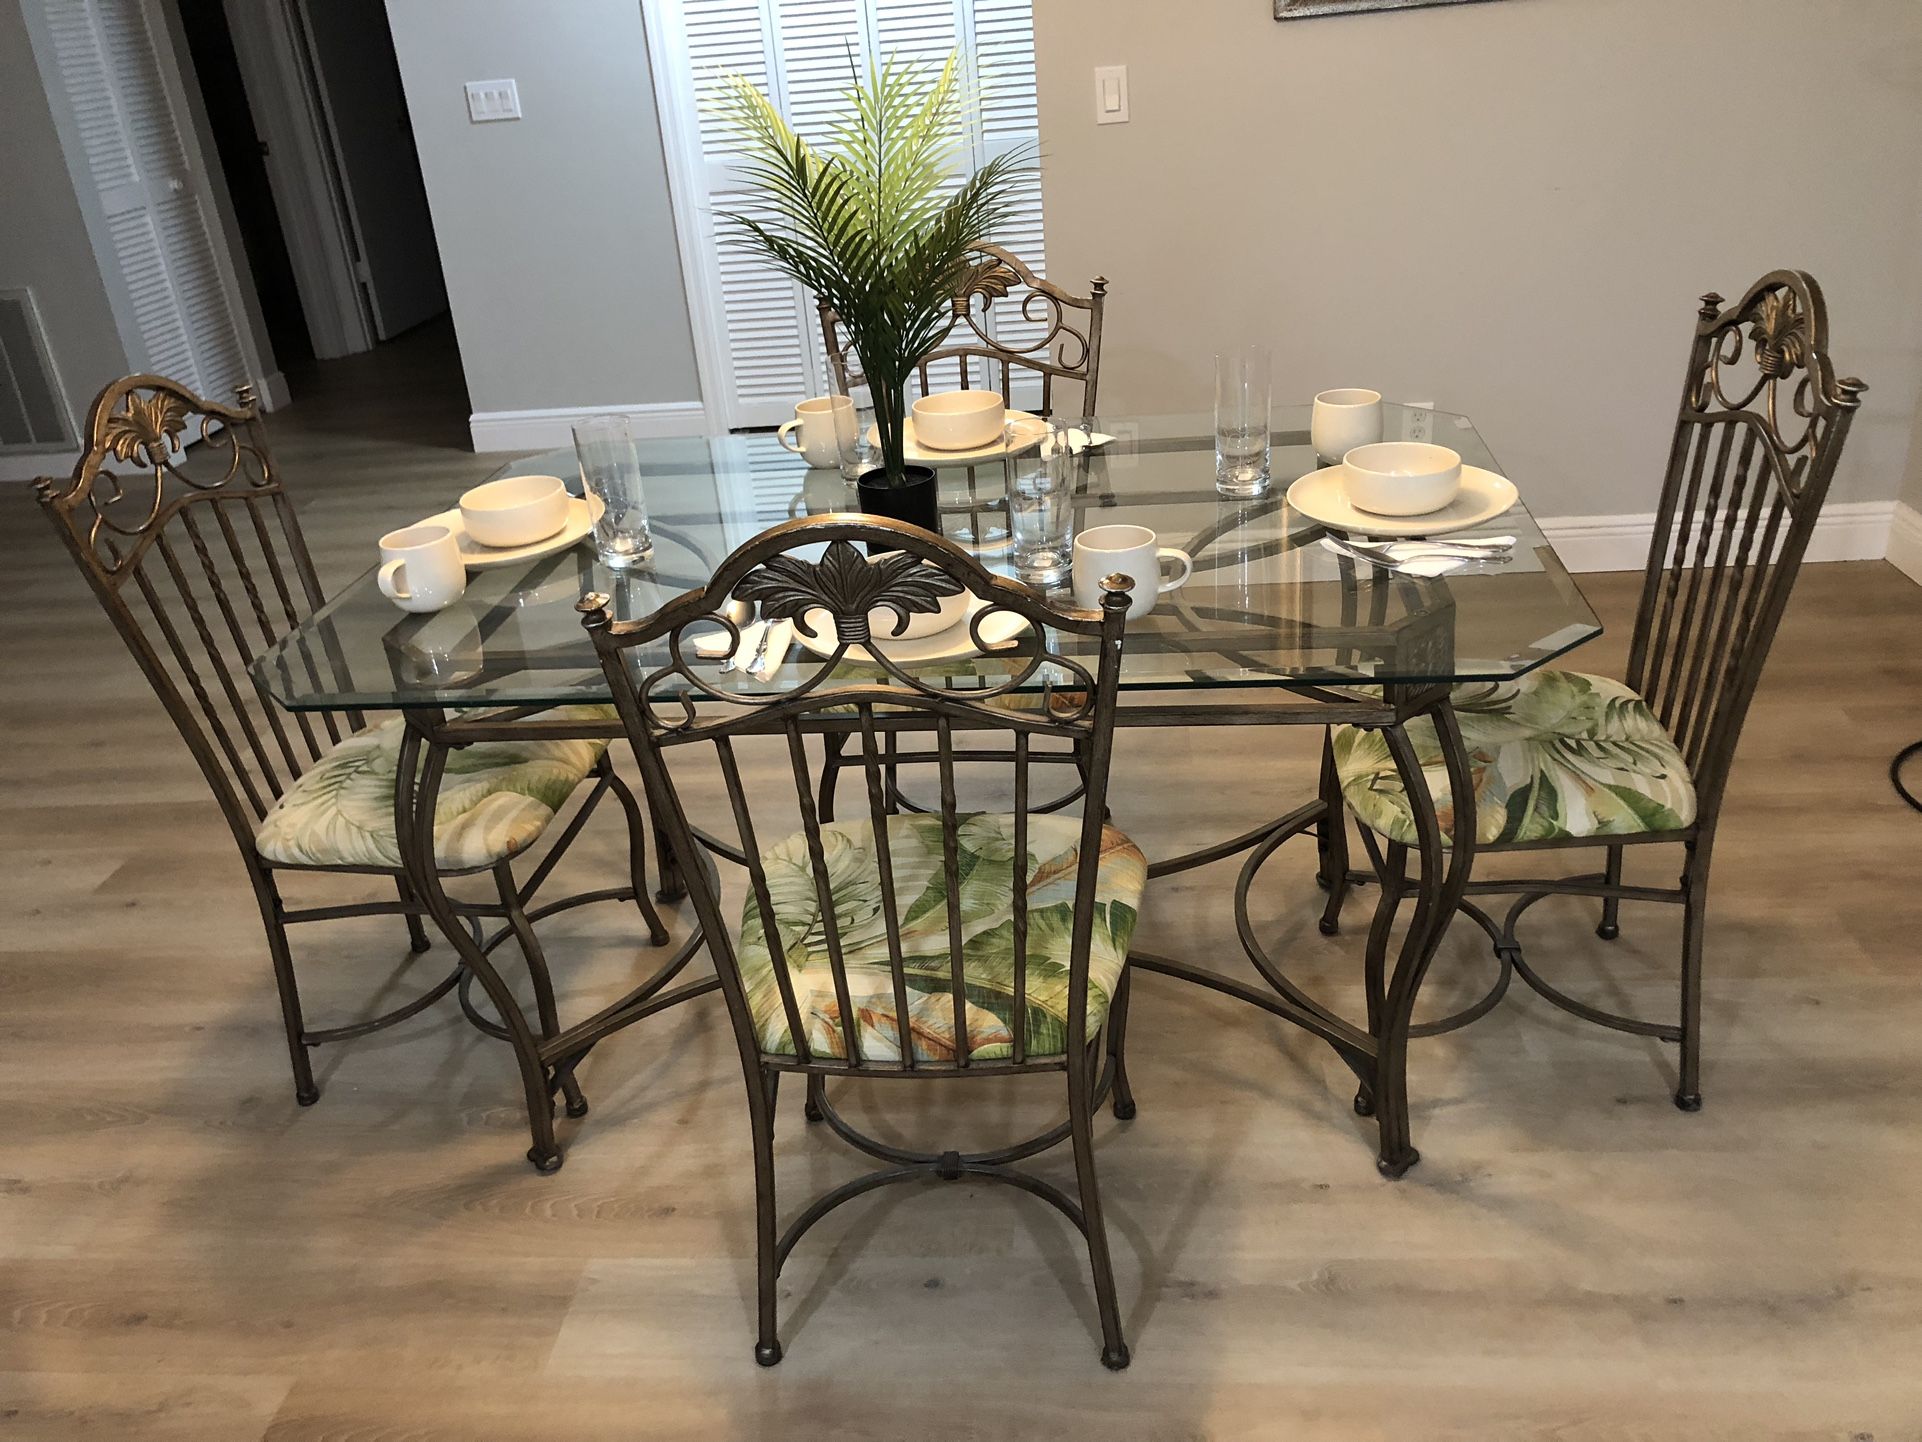 Glass Top Dining Room Table With 4 Matching Chairs And 4 Matching Barstools